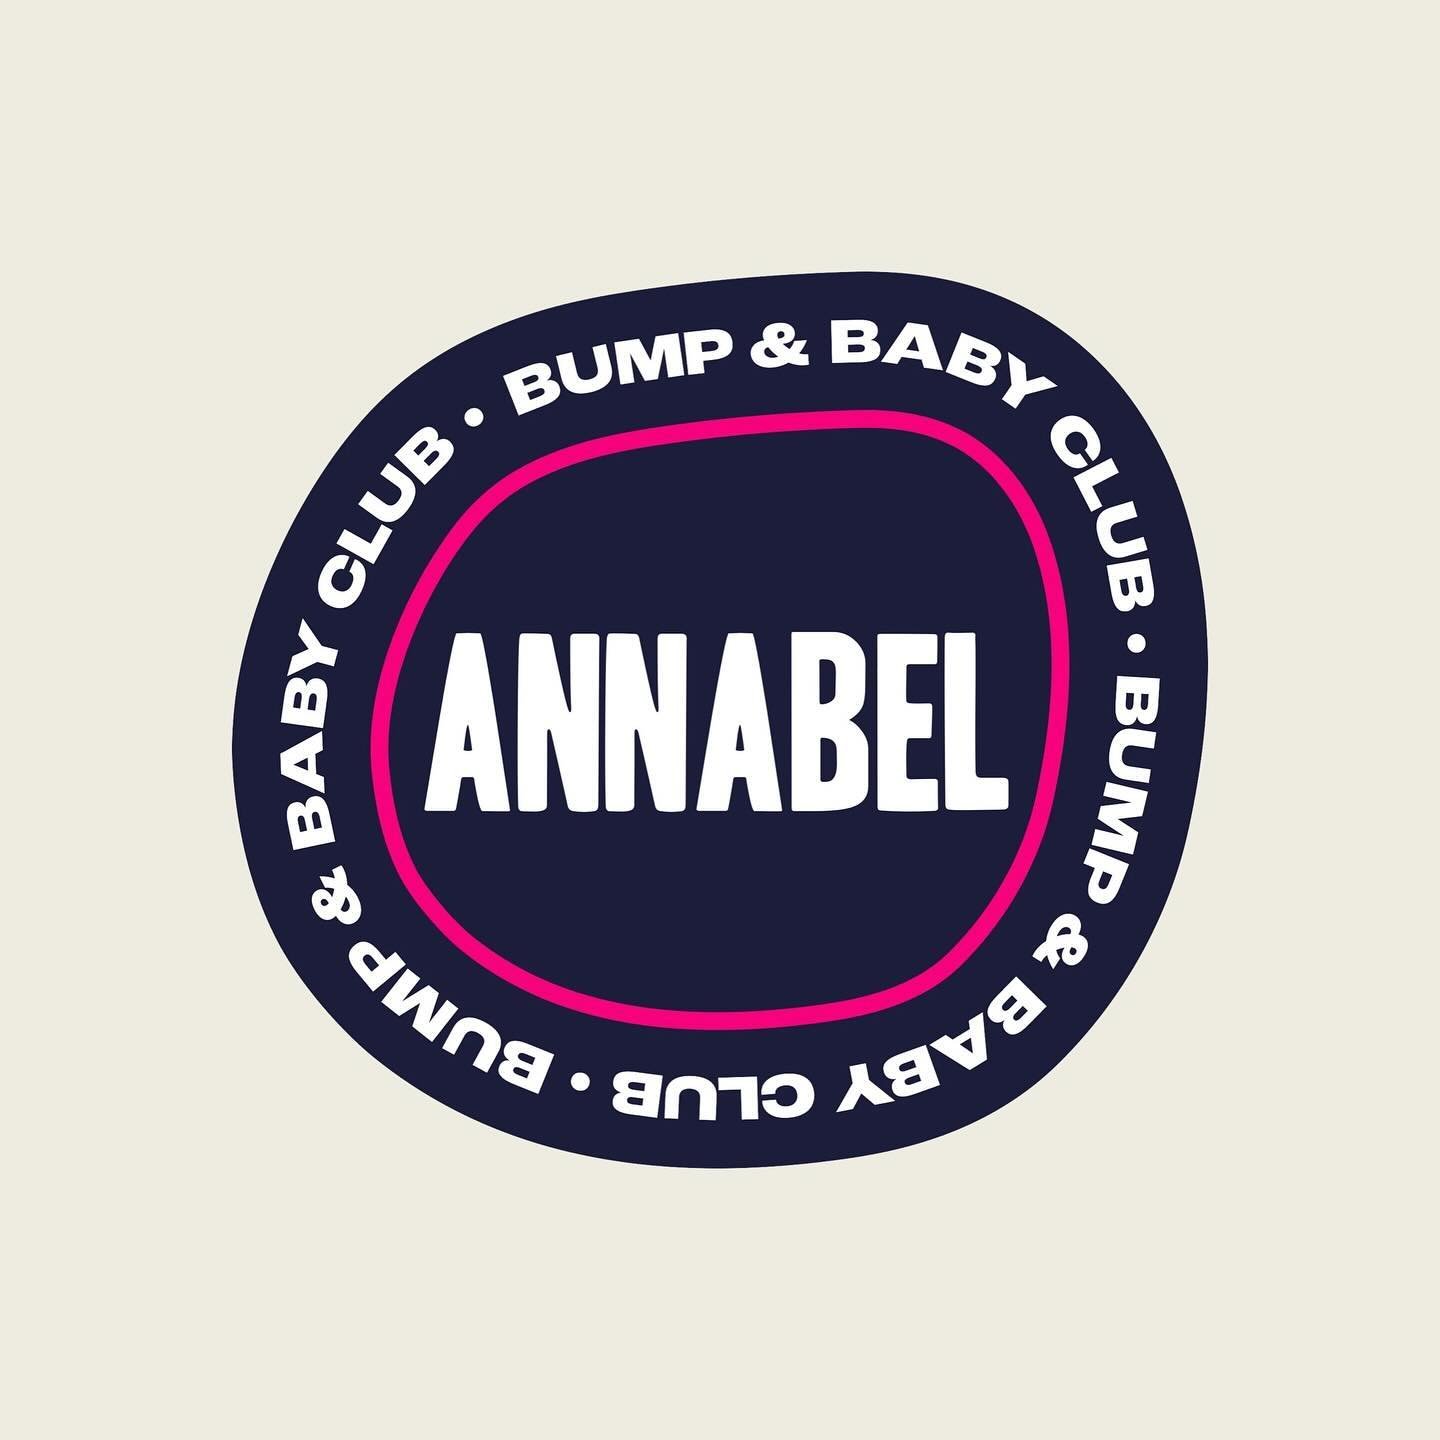 For our Stoke Newington Club member, Annabel, motherhood has been the most gratifying and rewarding experience of her life - and it was pure joy for me to chat to her about all aspects her journey so far 😊 We spoke about everything from pregnancy an